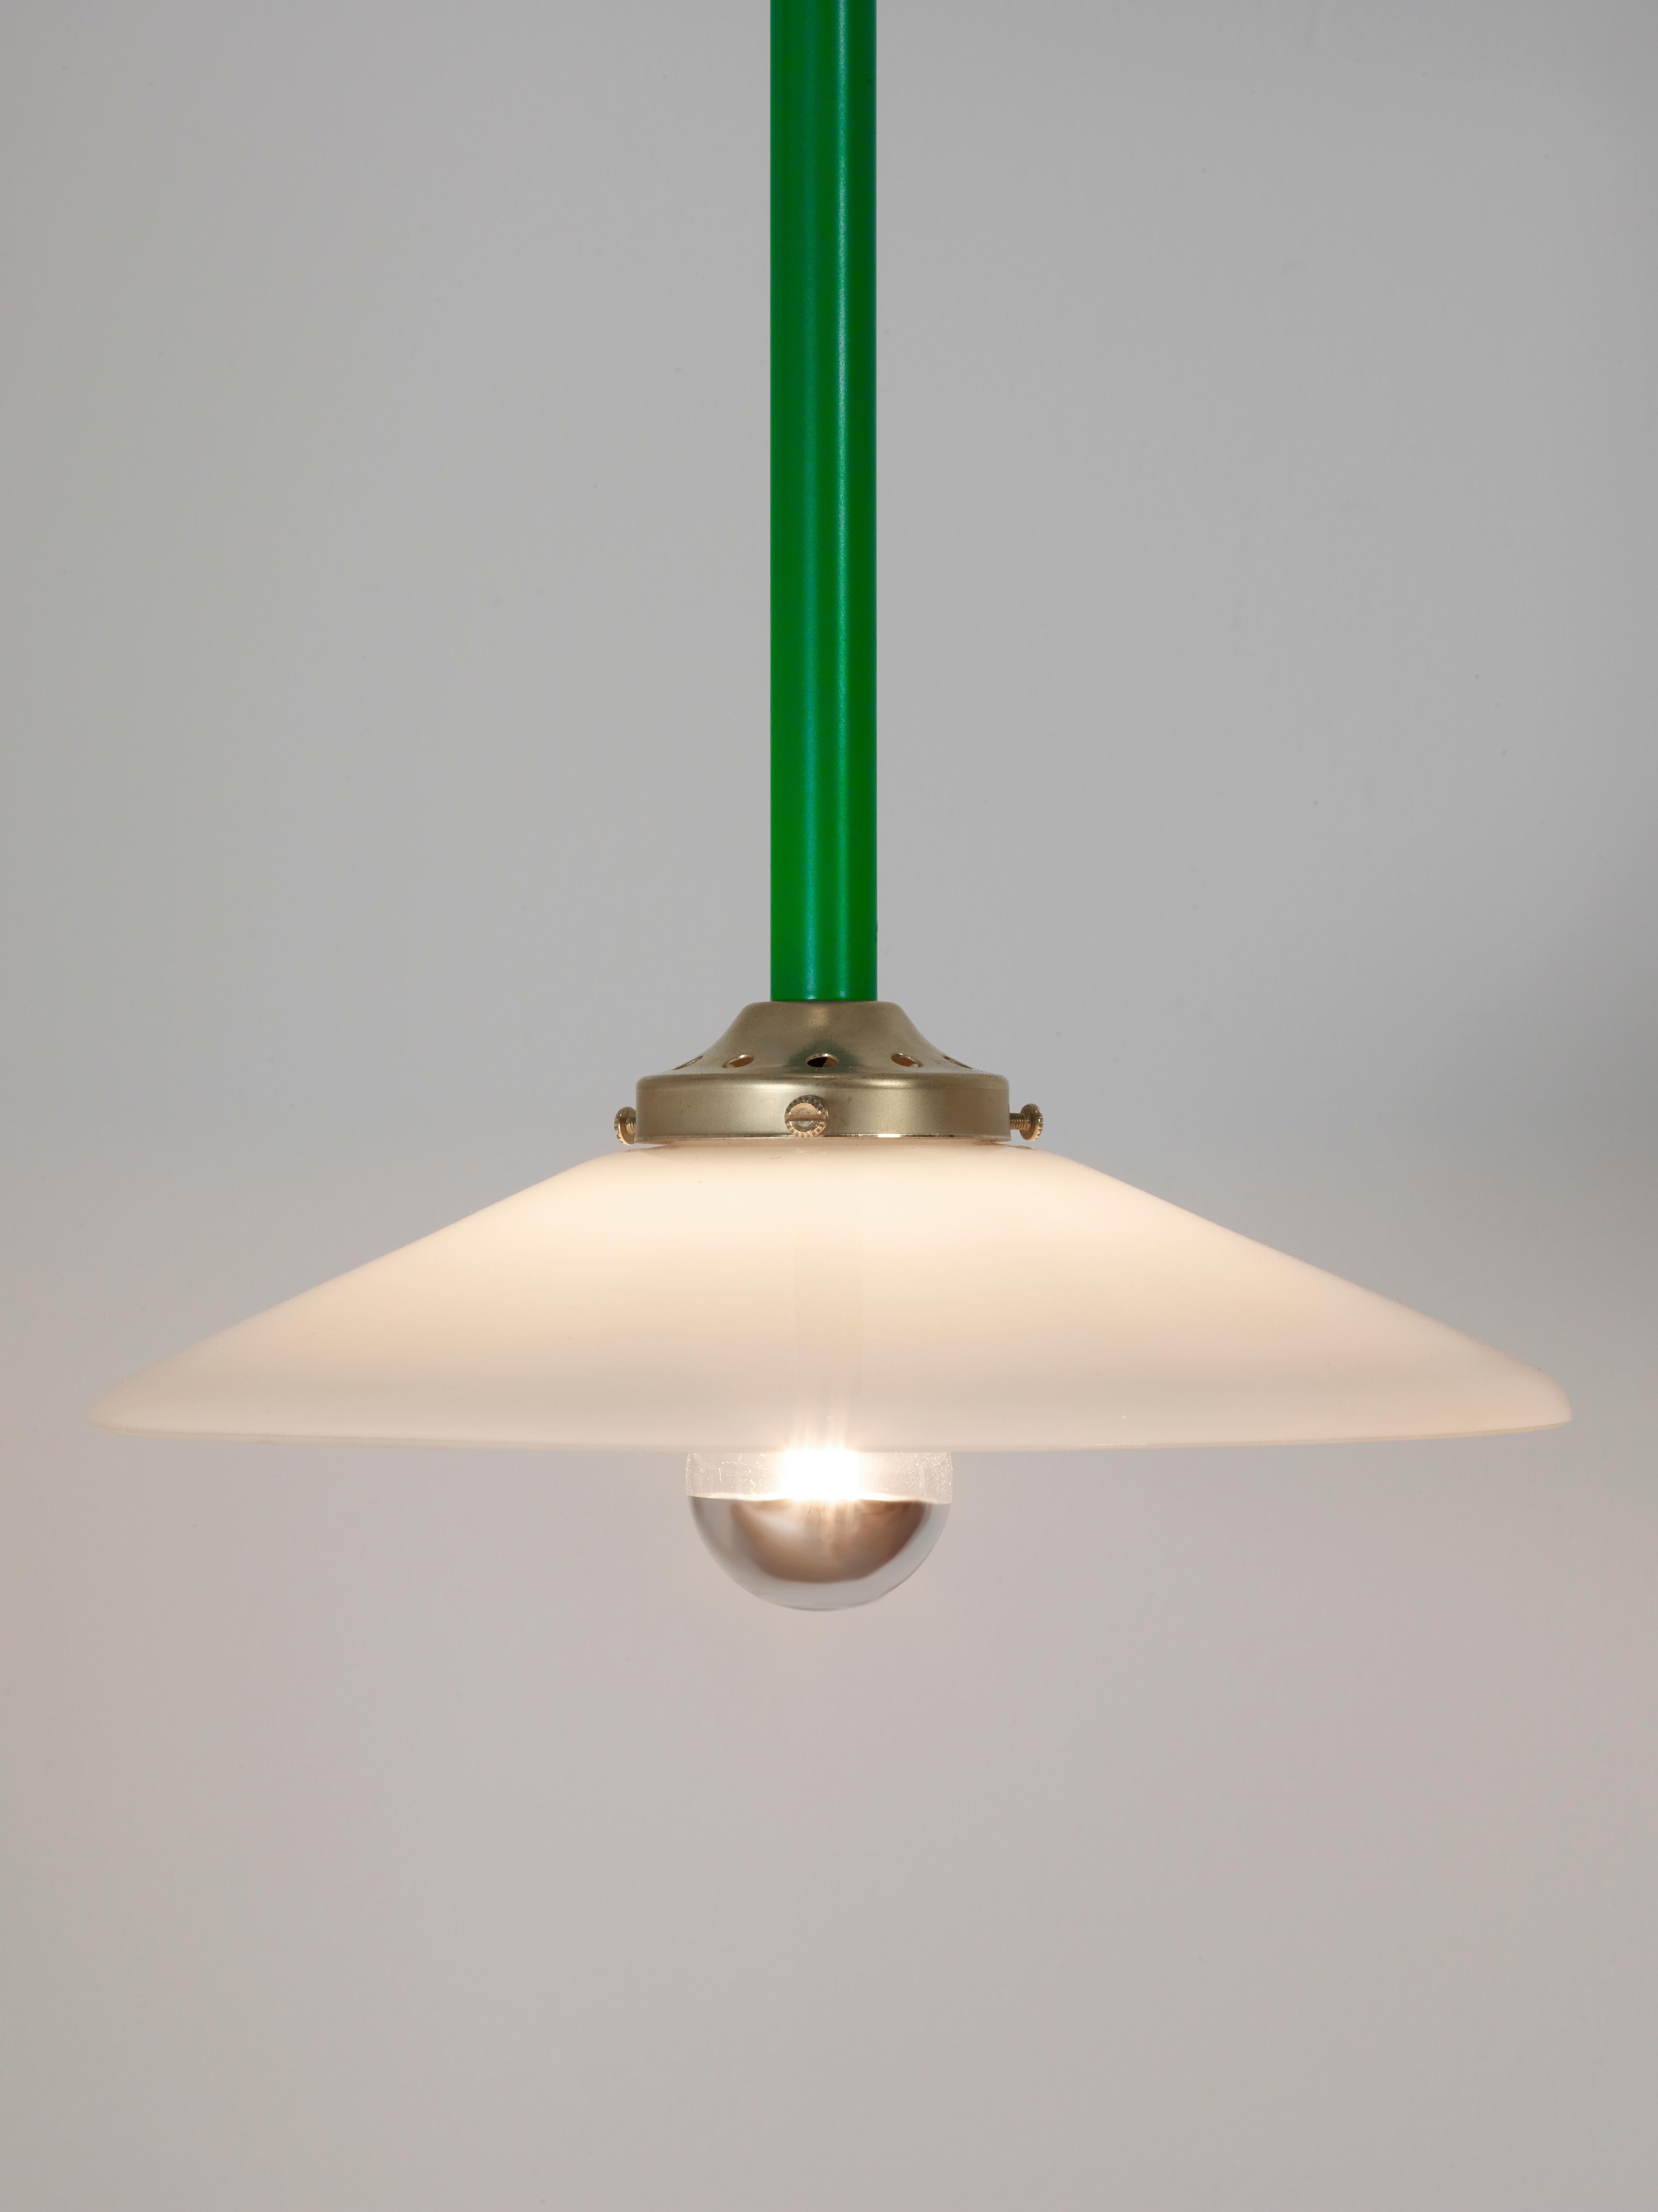 Organic Modern Contemporary Ceiling Lamp N°4 by Muller Van Severen x Valerie Objects, Green For Sale